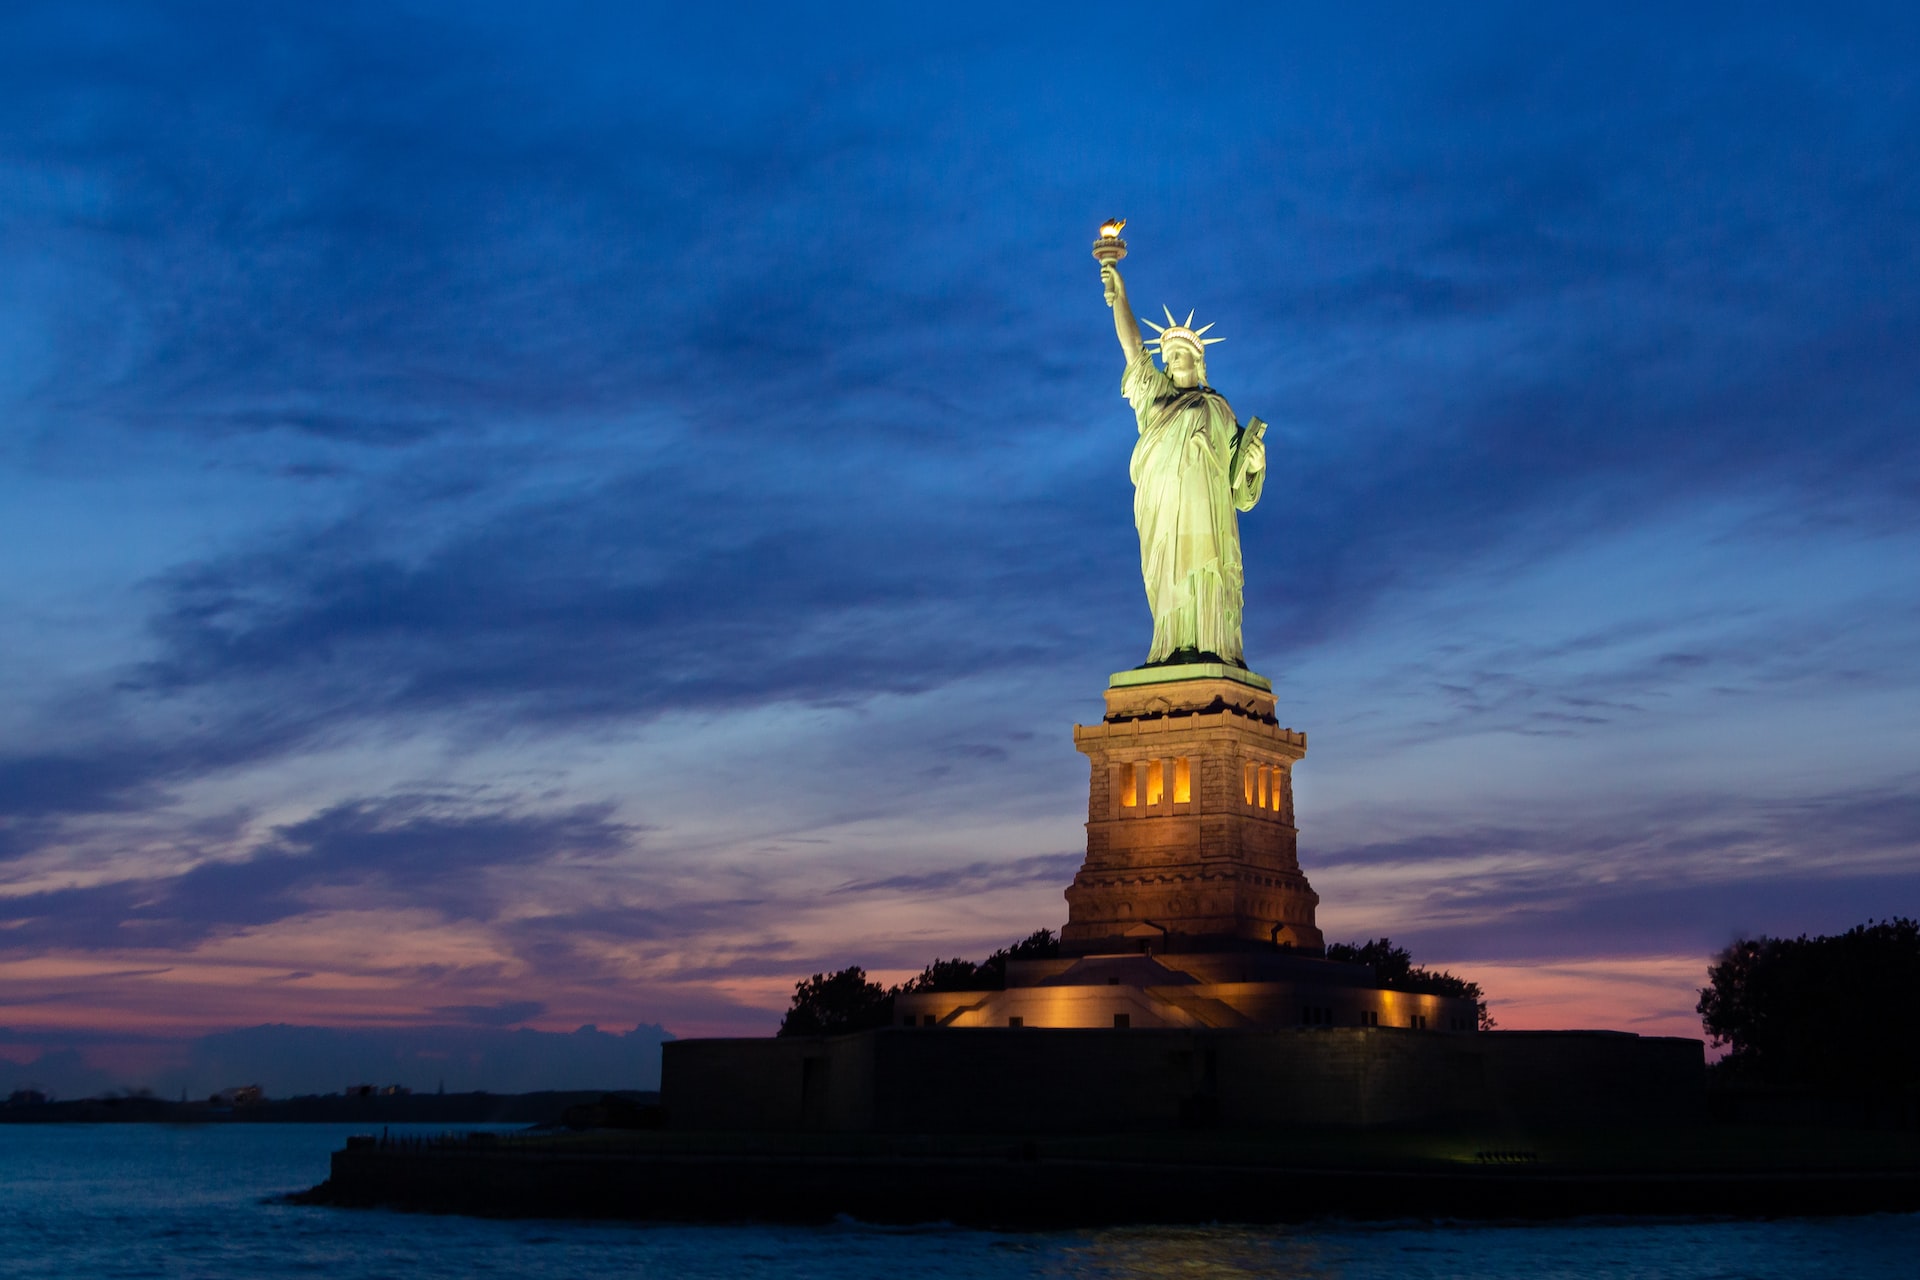 The Statue of Liberty, lit up at night.